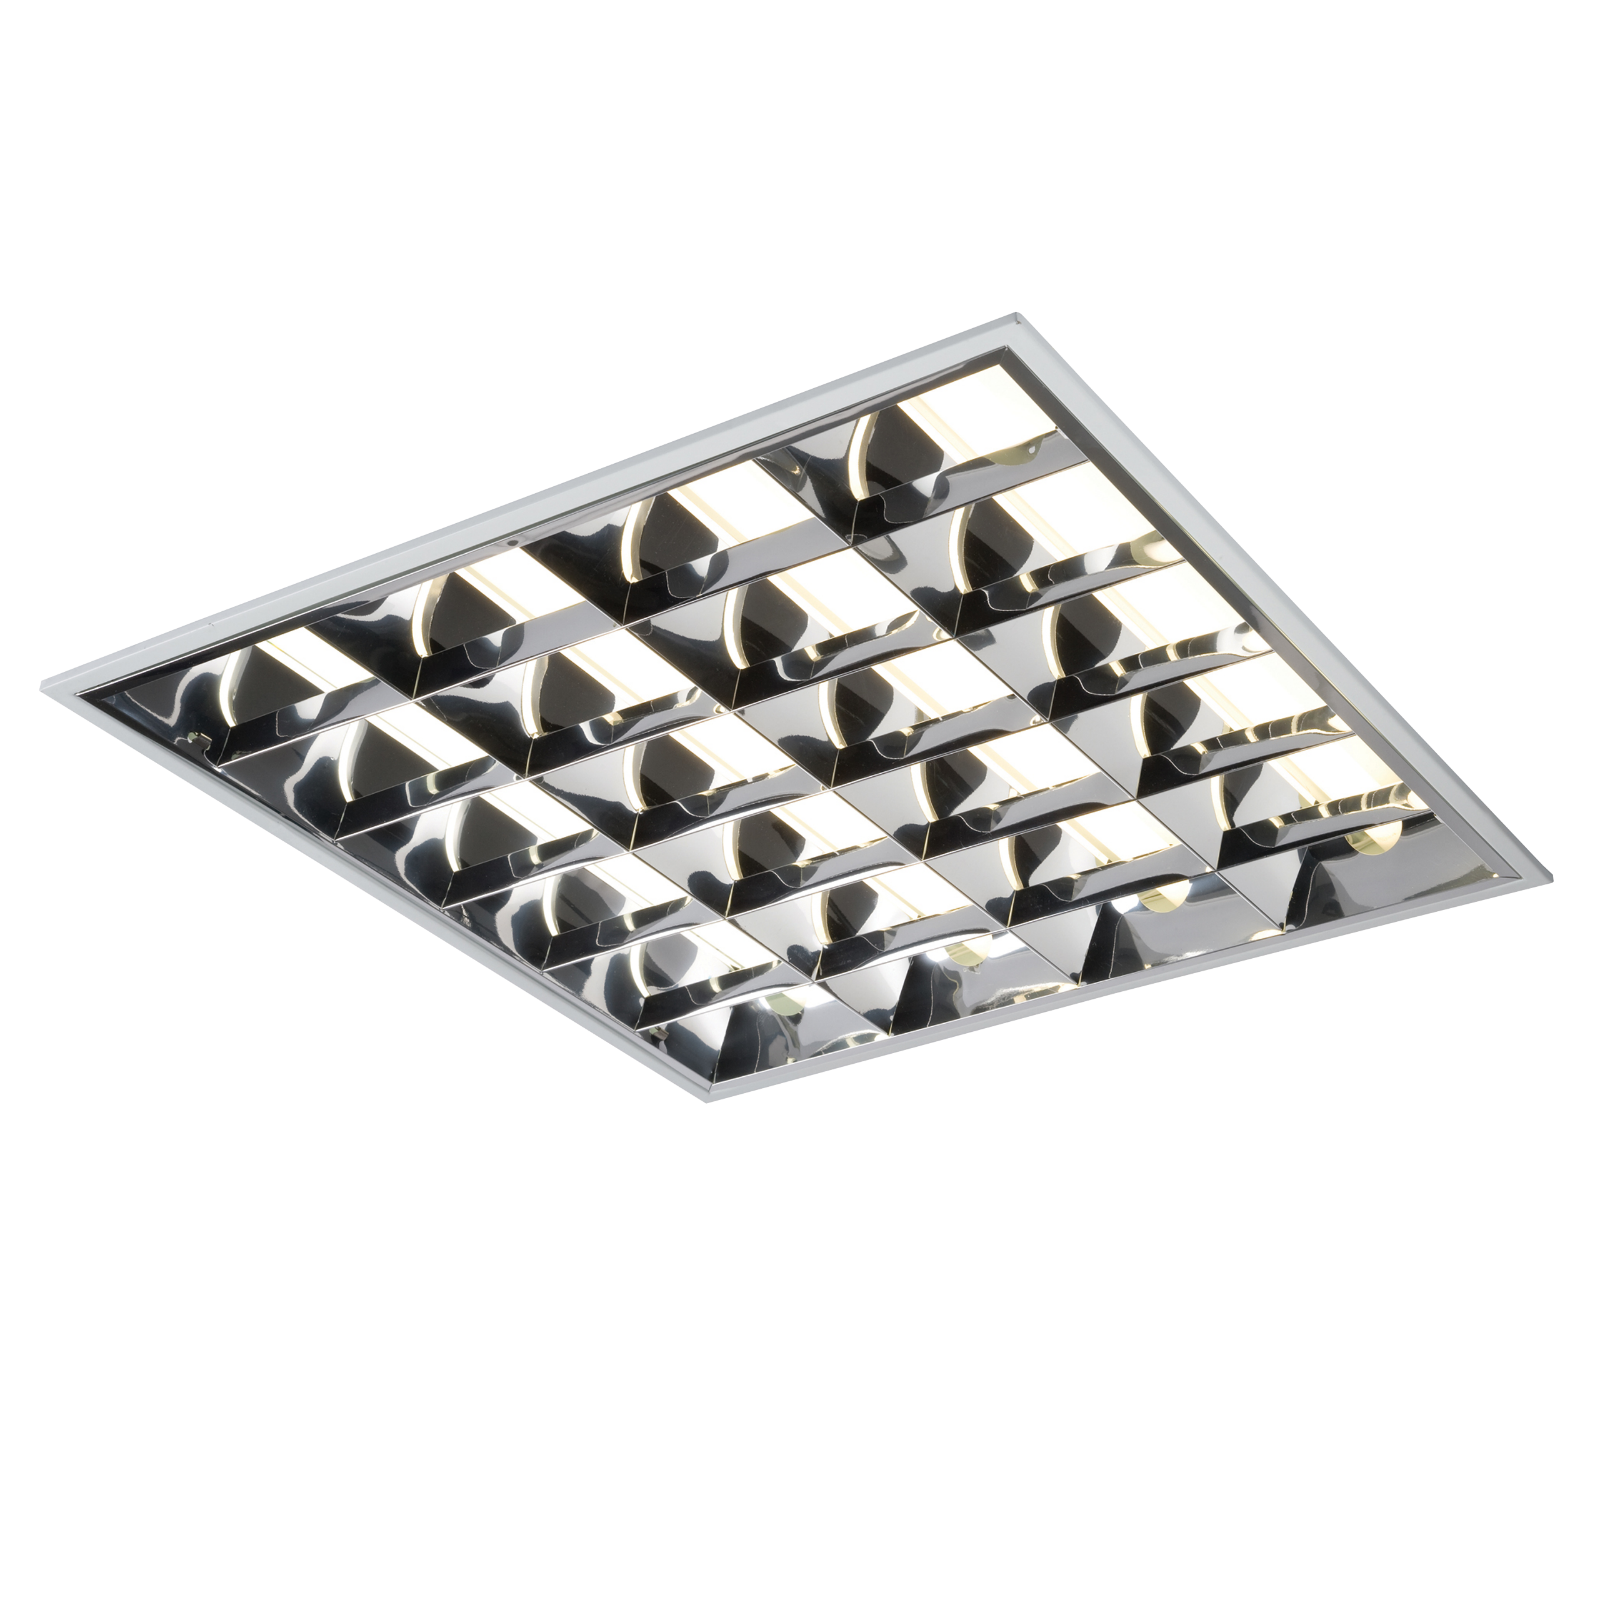 IP20 4x18W T8 CAT2 Surface Mounted Emergency Fluorescent Fitting 610x600x75mm - SURF418EMHF 